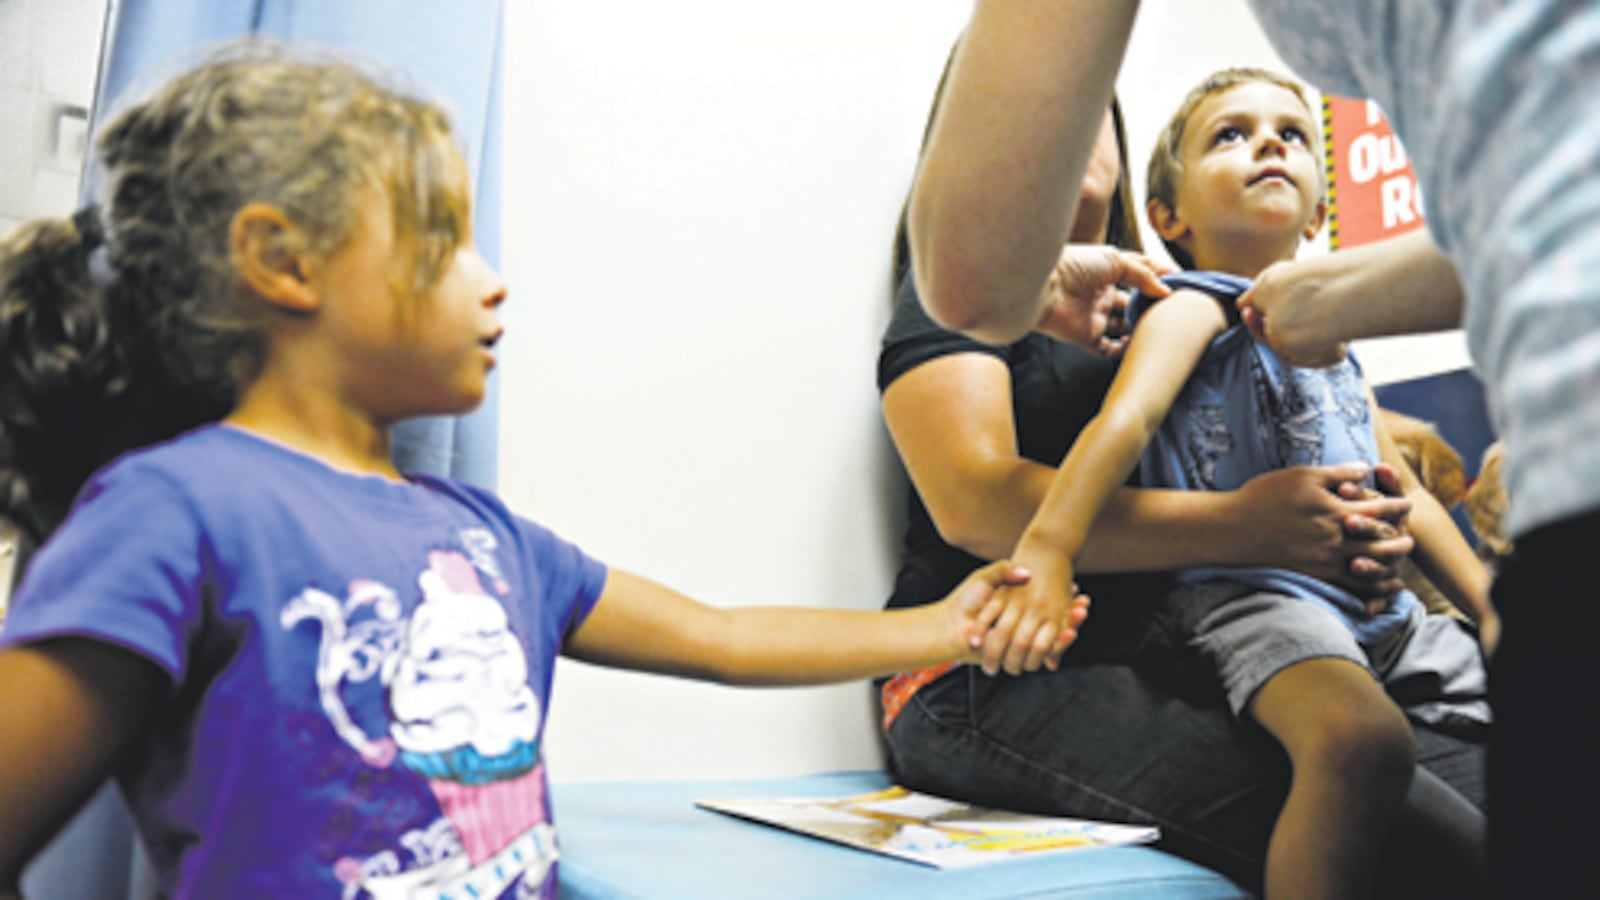 Nyah Ojeda, 6,  offers her hand to her four-year-old brother, Elija Ojeda, while nurses prepare him for a round of vaccinations in 2012.